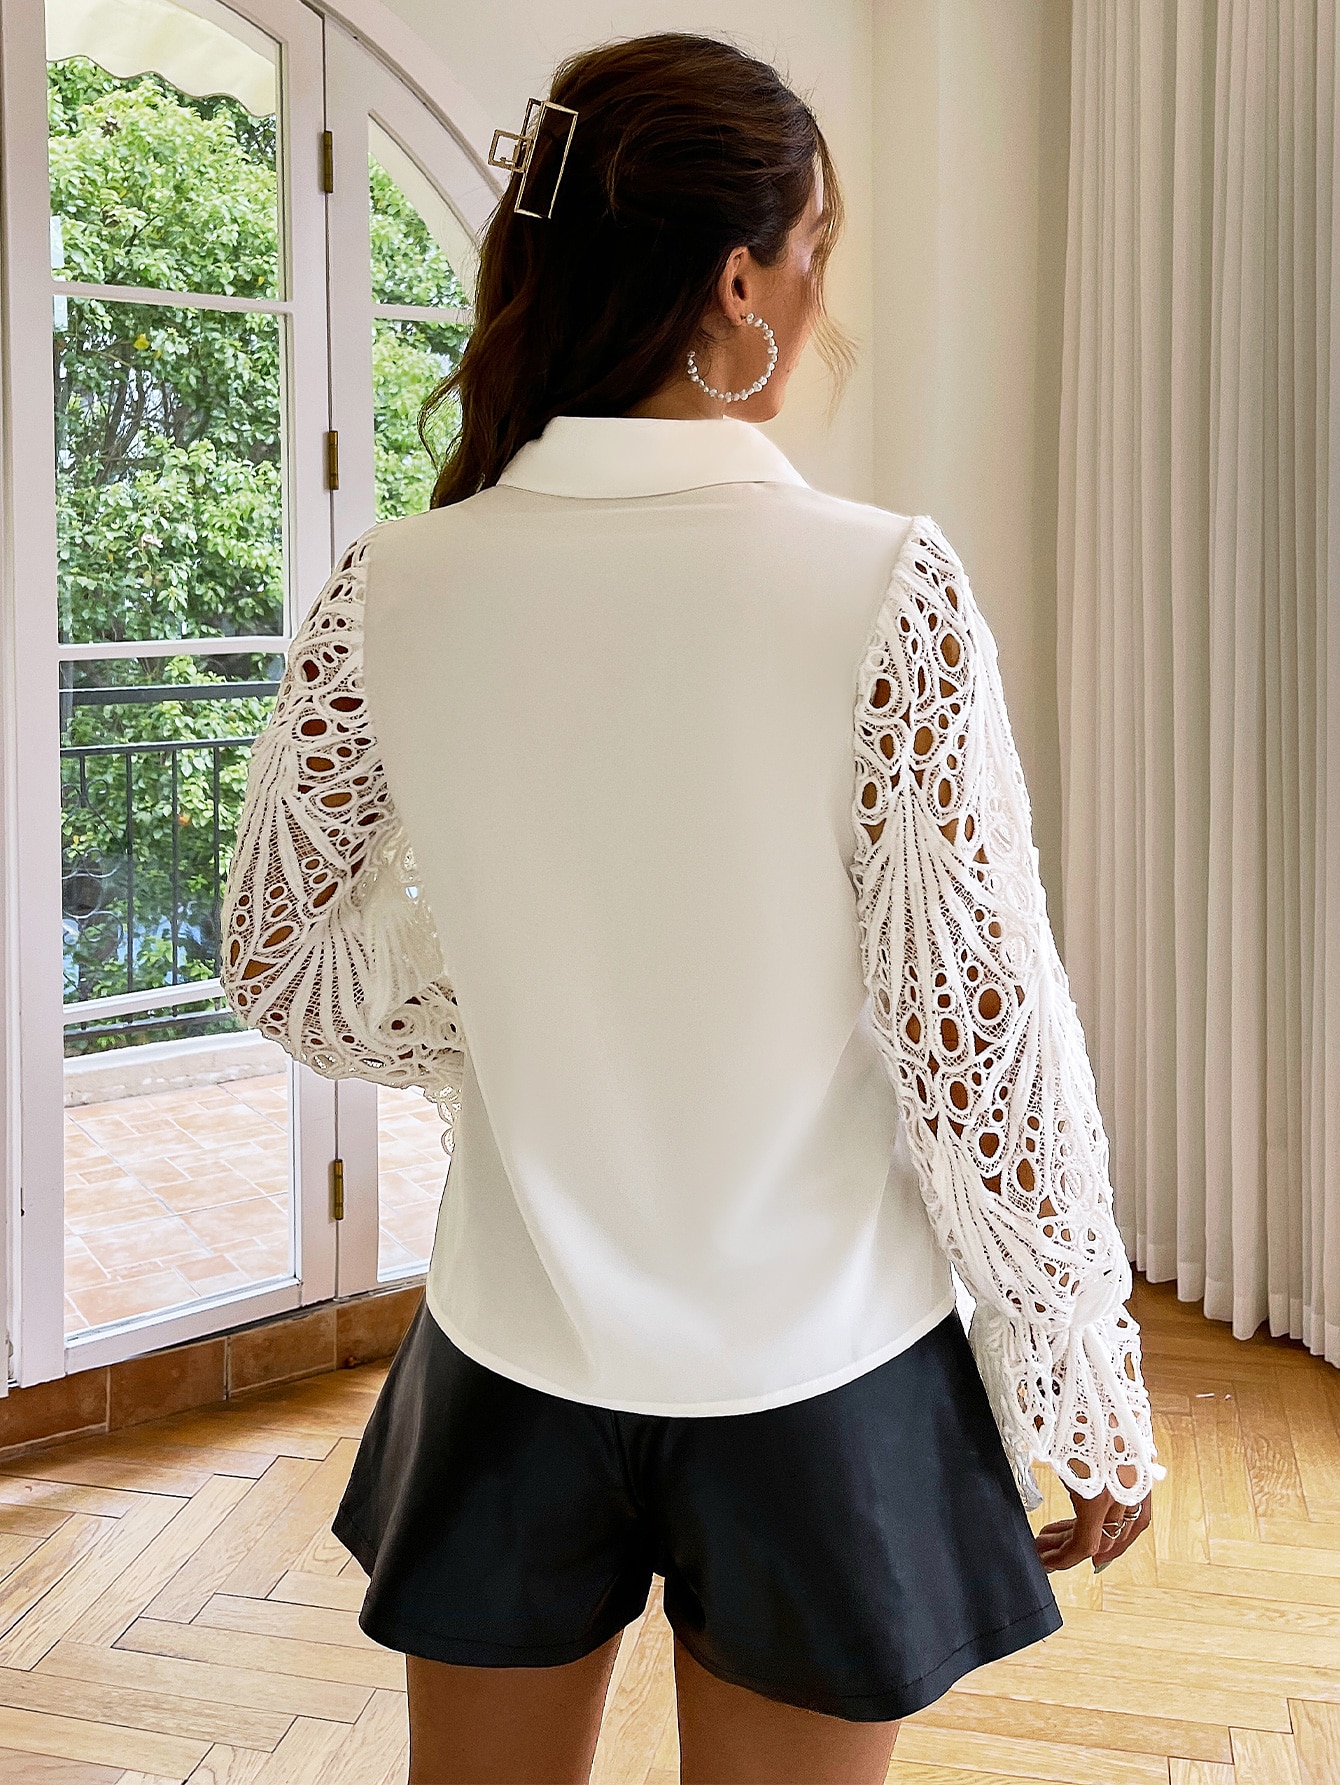 Simplee-Hollow-out-long-sleeves-sexy-white-shirt-women-Elegant-lace-patchwork-blouse-2022-Female-ruffle-5